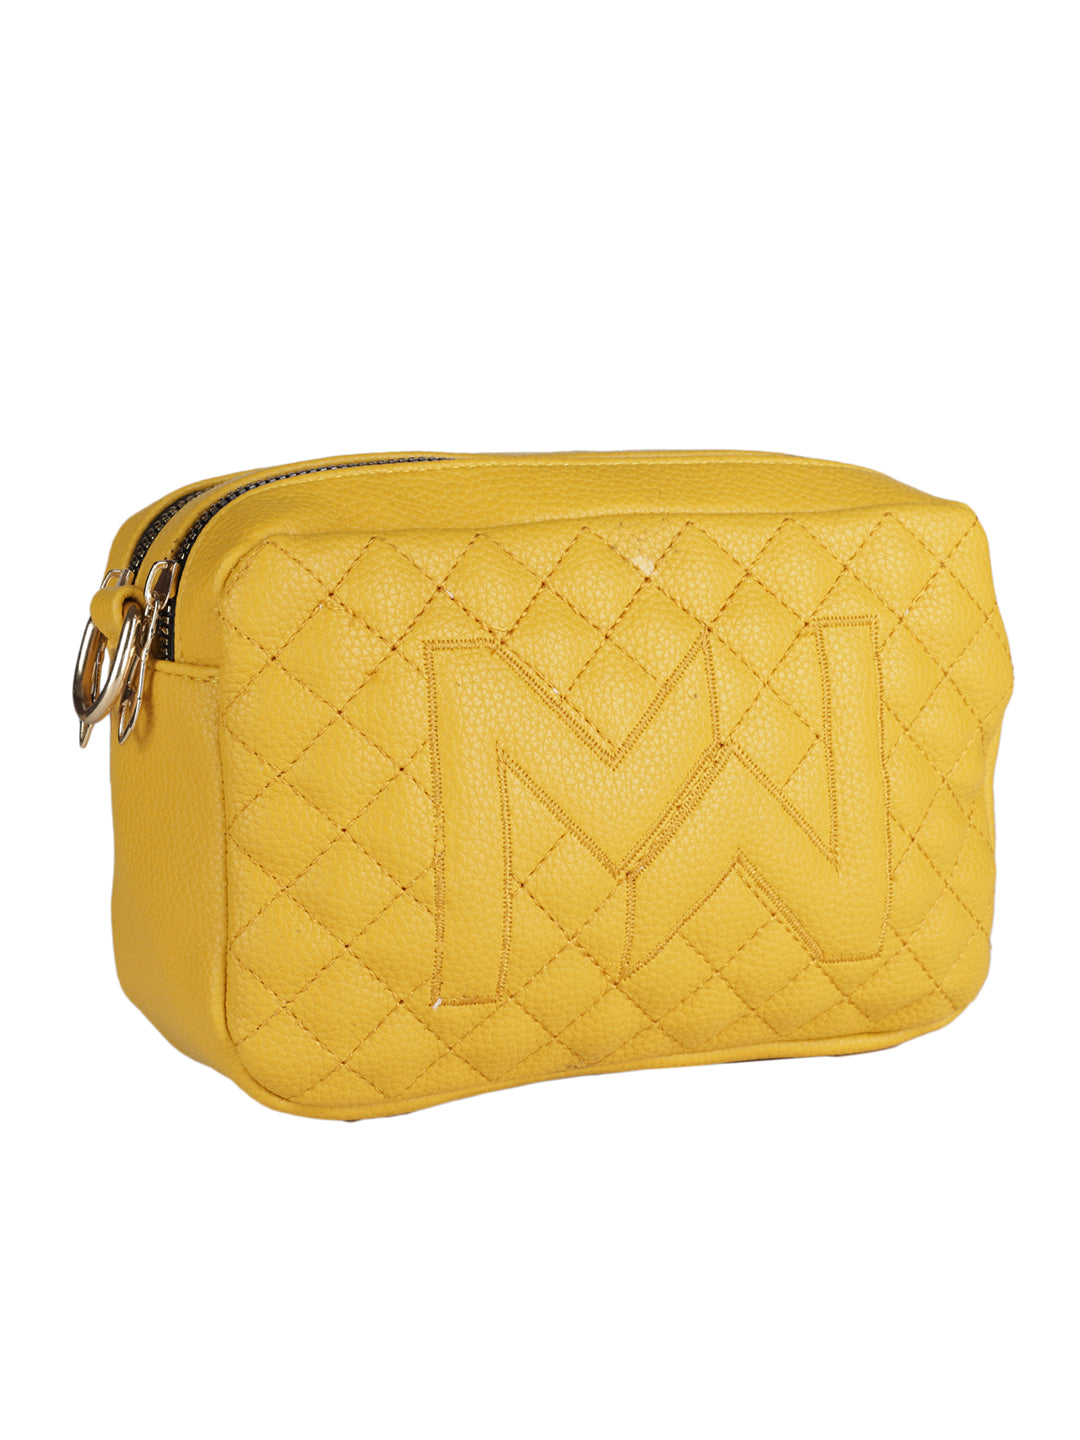 MINI WESST Yellow Casual Solid Sling Bag(MWHB150YL)